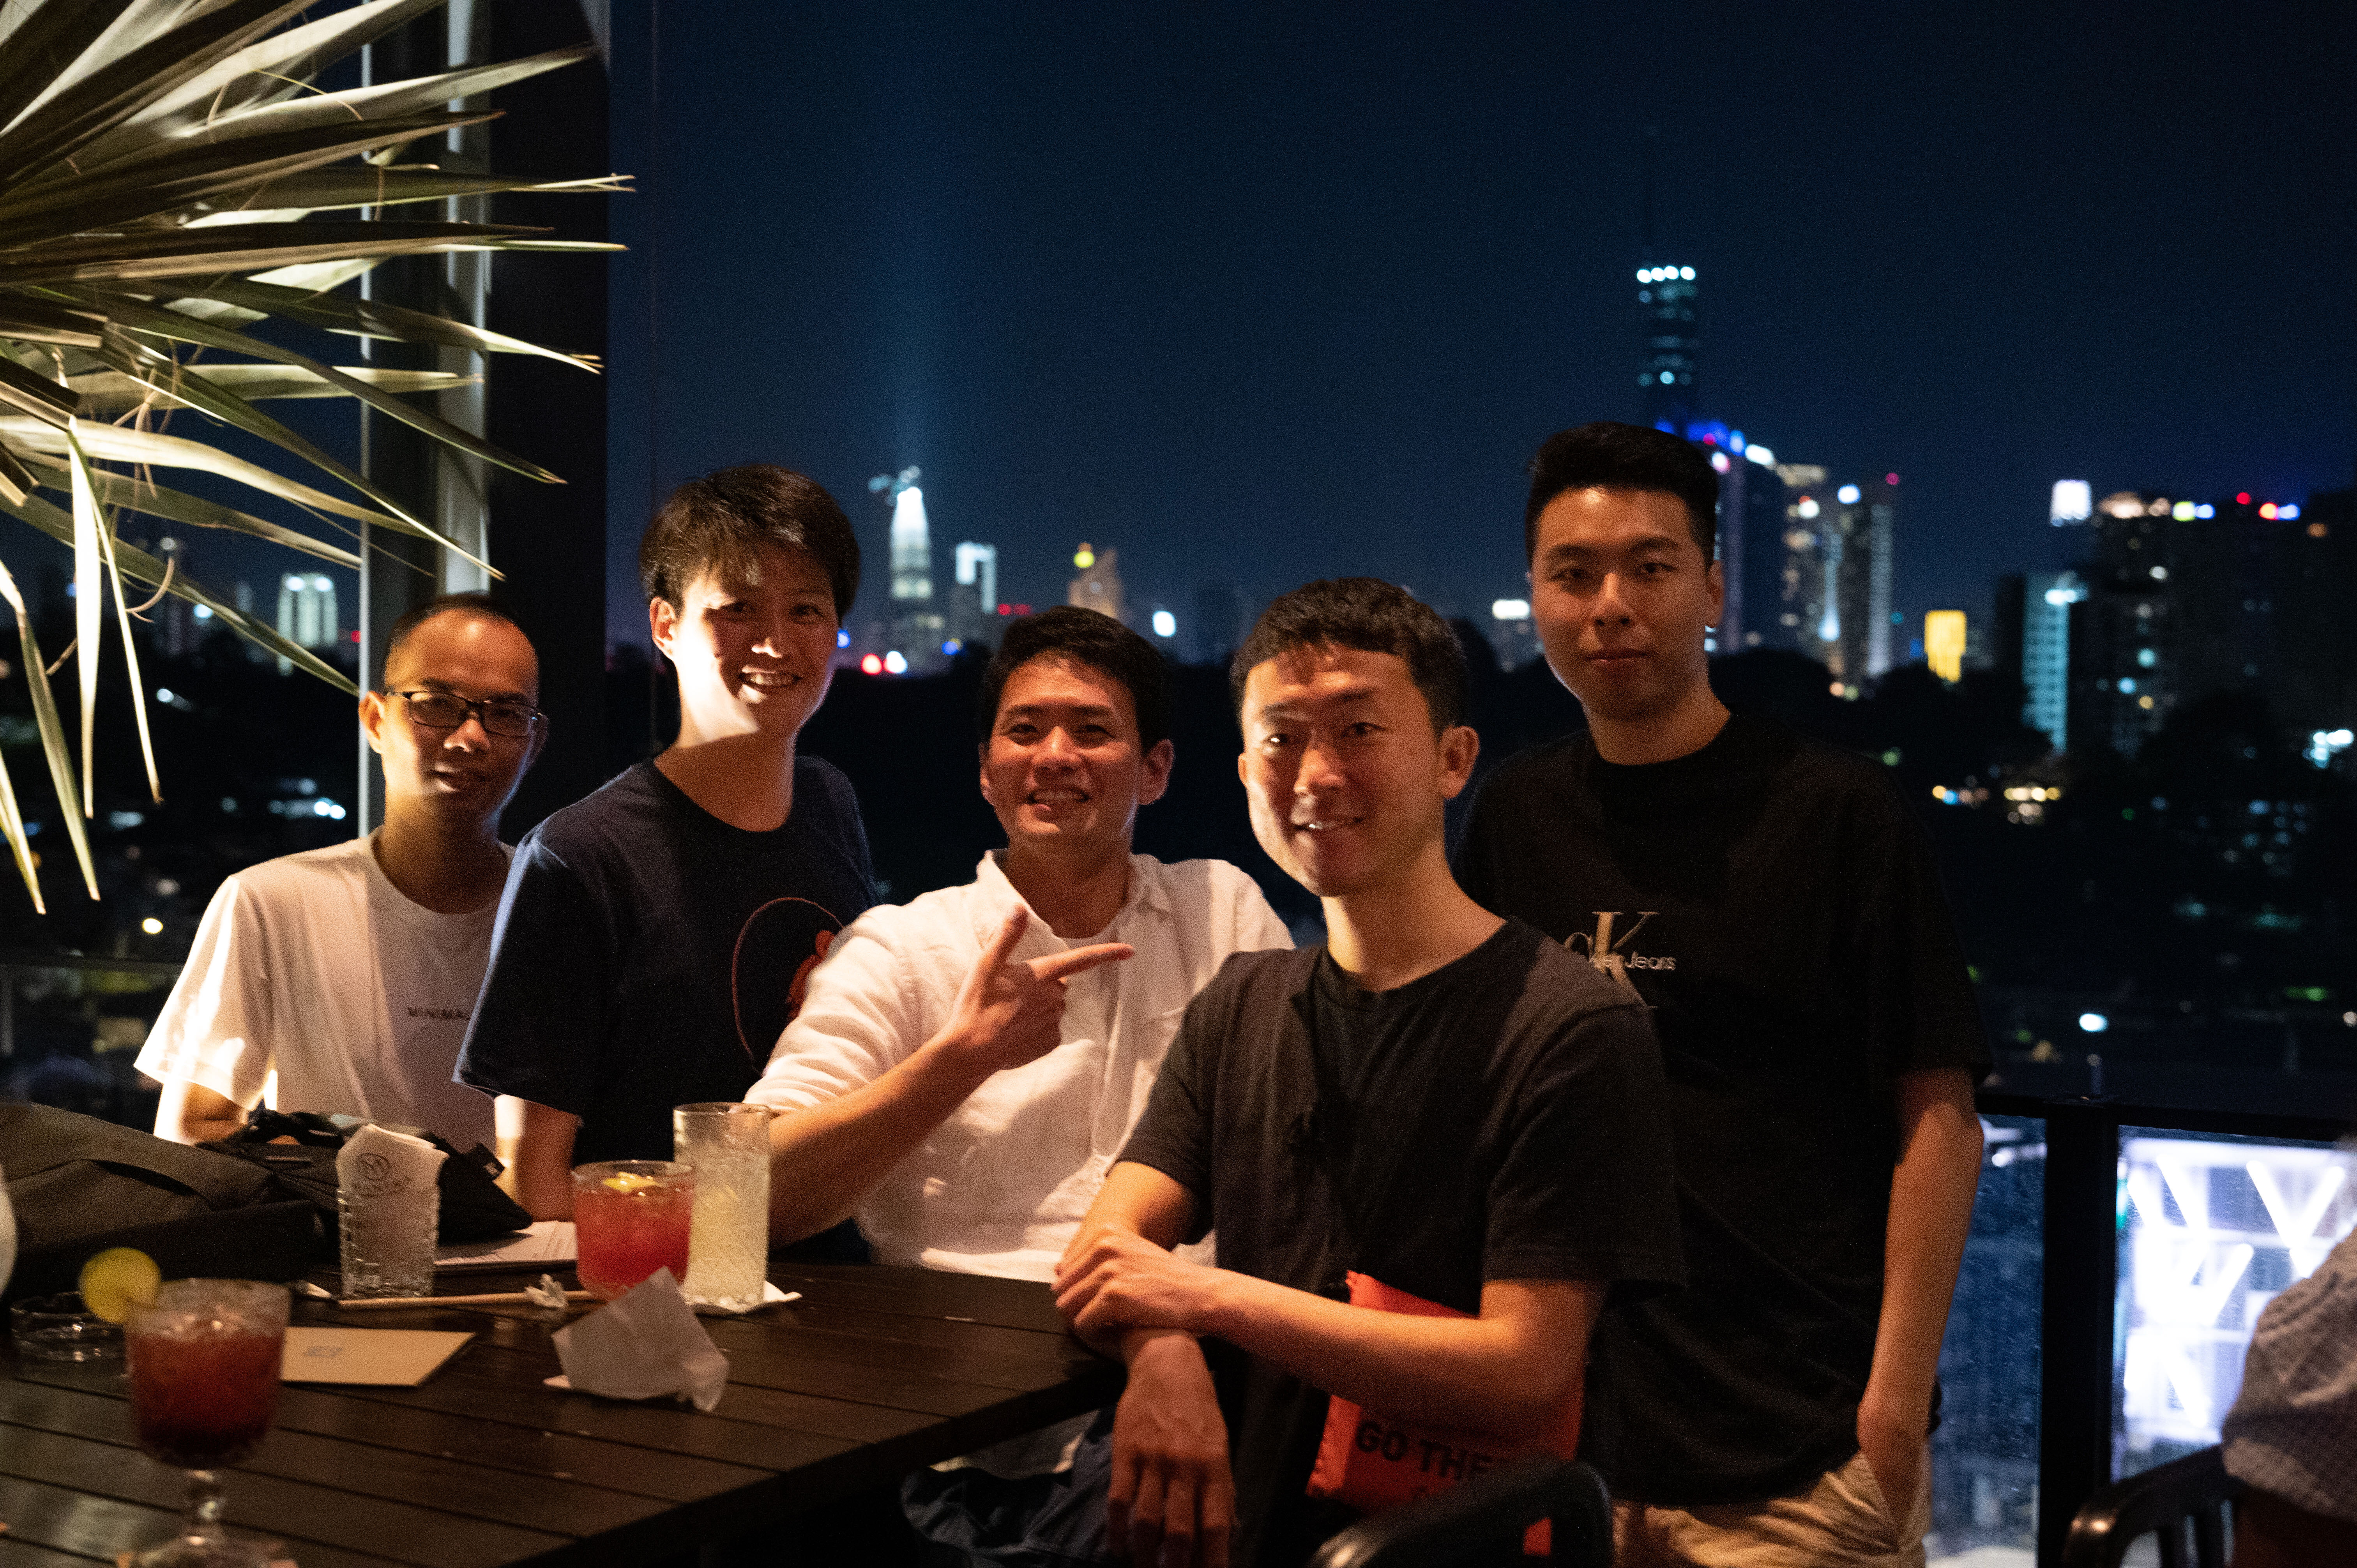 Group photo in night bar overseeing KLCC